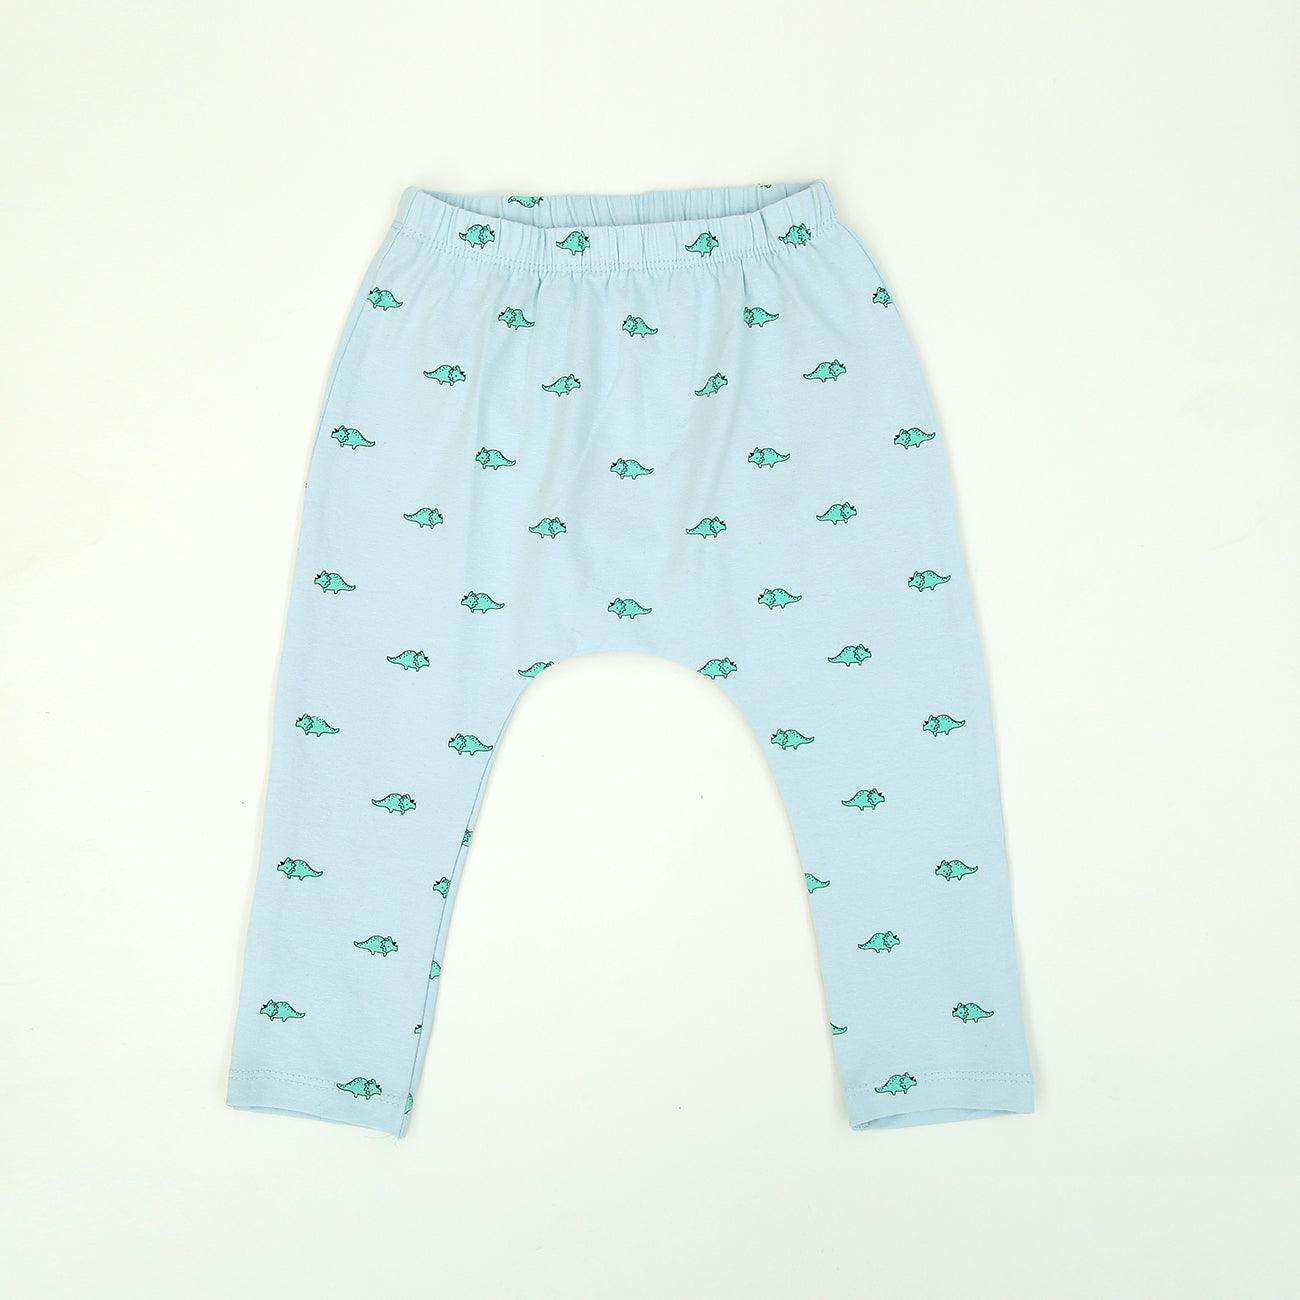 Imported All-Over Dino Printed Soft Cotton Legging For Girls 1 MONTH - 12-18 MONTH (LE-11562) - Brands River